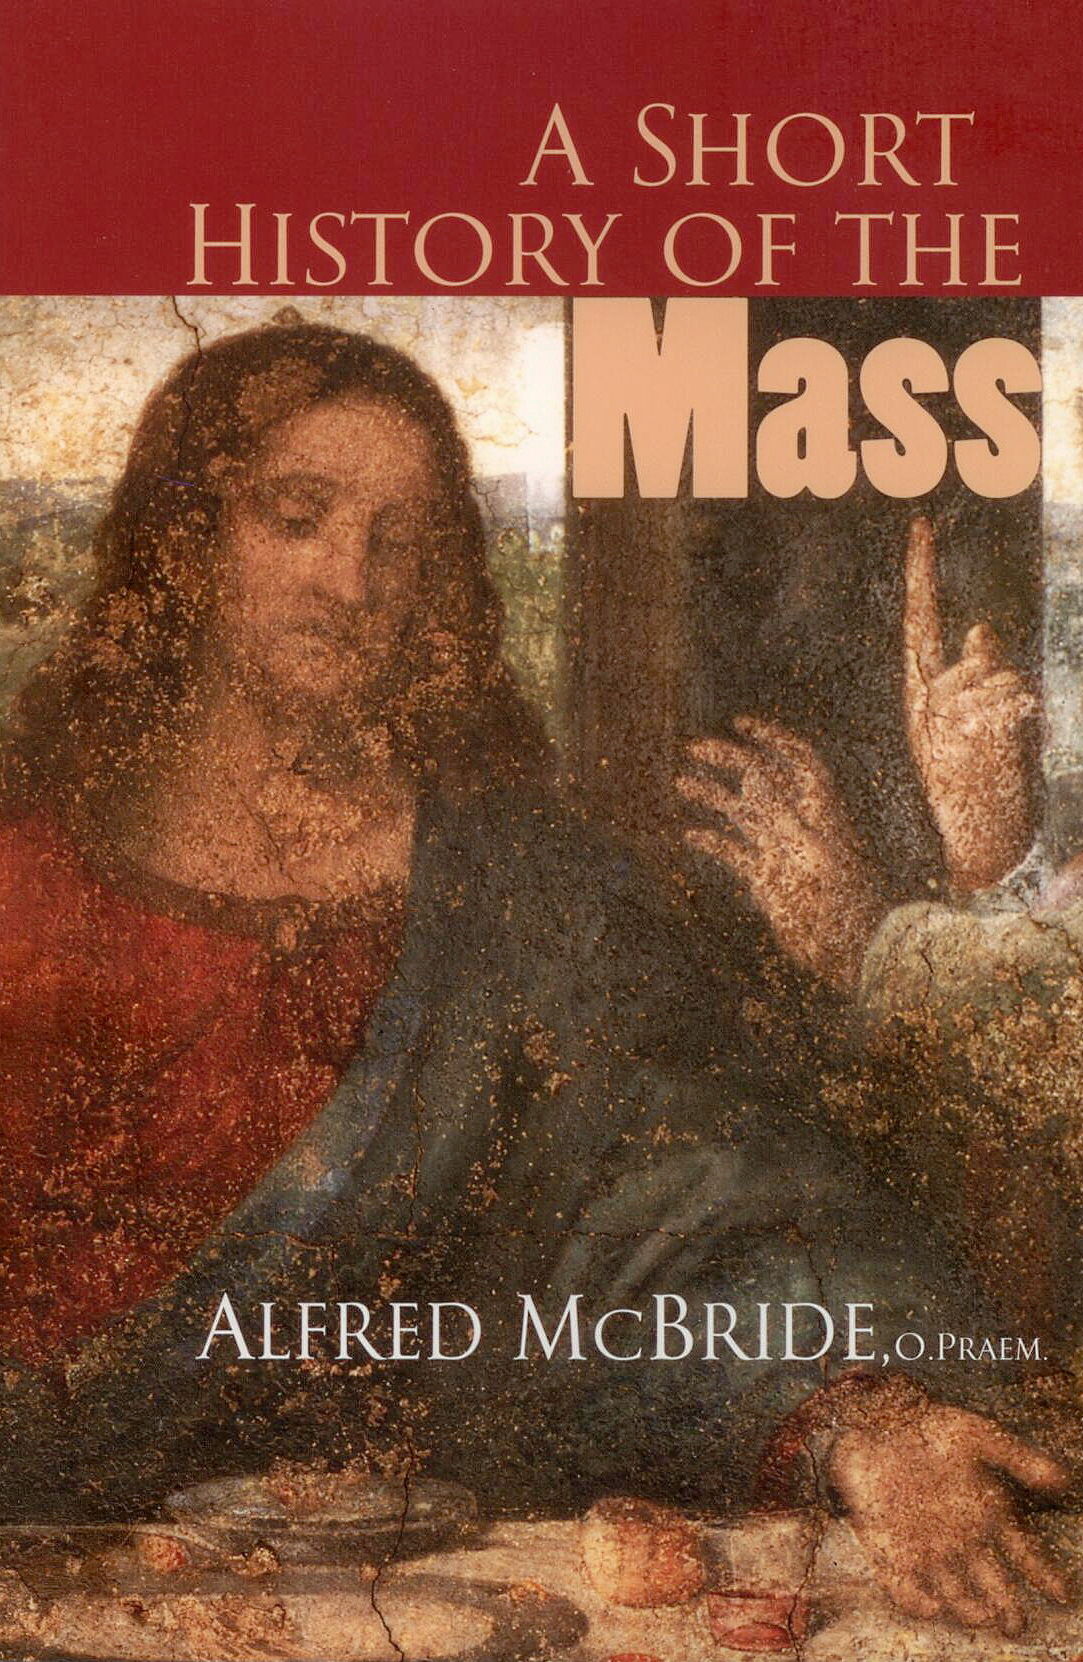 A Short History Of The Mass by Alfred McBride